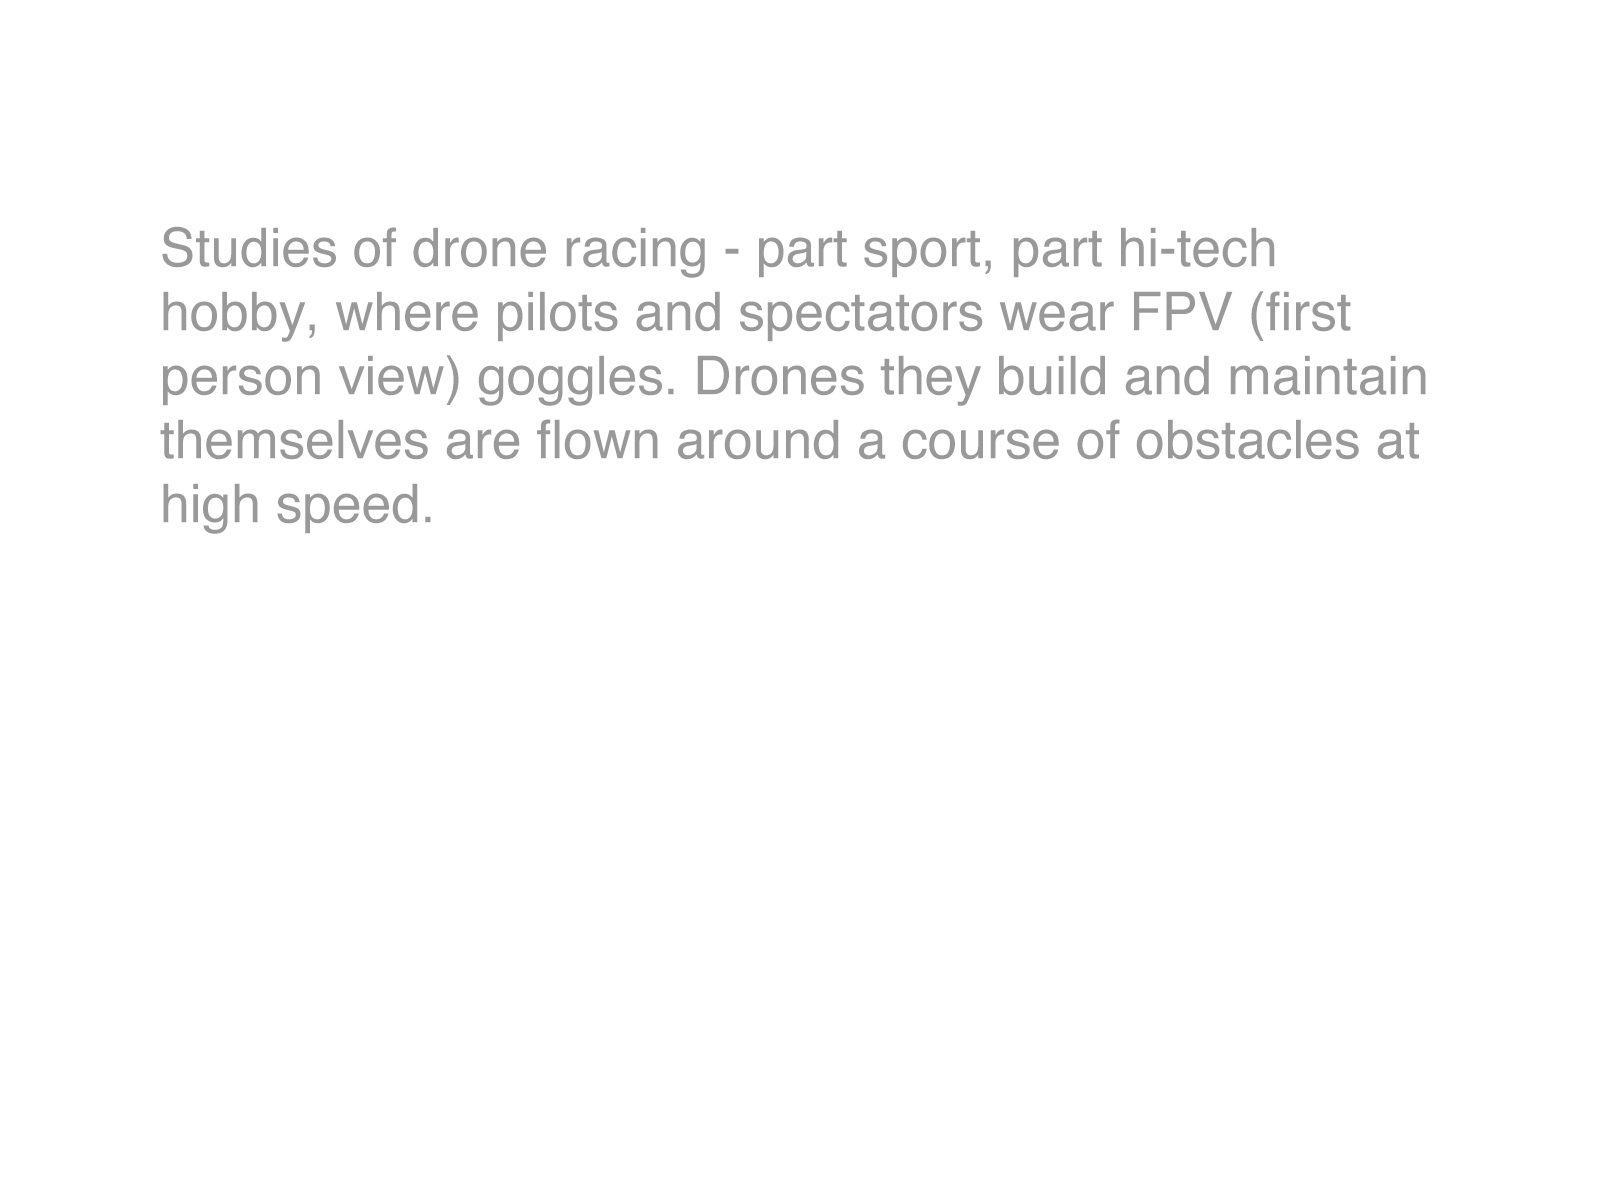 drone-racing-statement